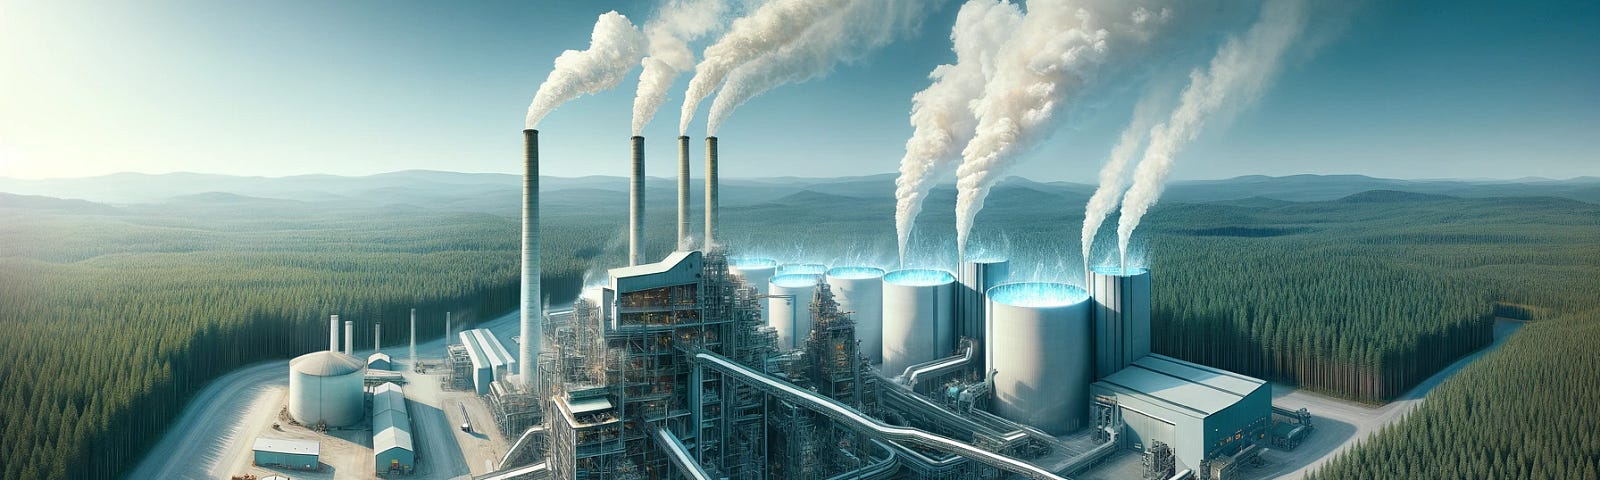 ChatGPT & DALL-E generated panoramic image showcasing a pulp and paper mill using hydrogen to run its boilers, depicted by light bluish flames.